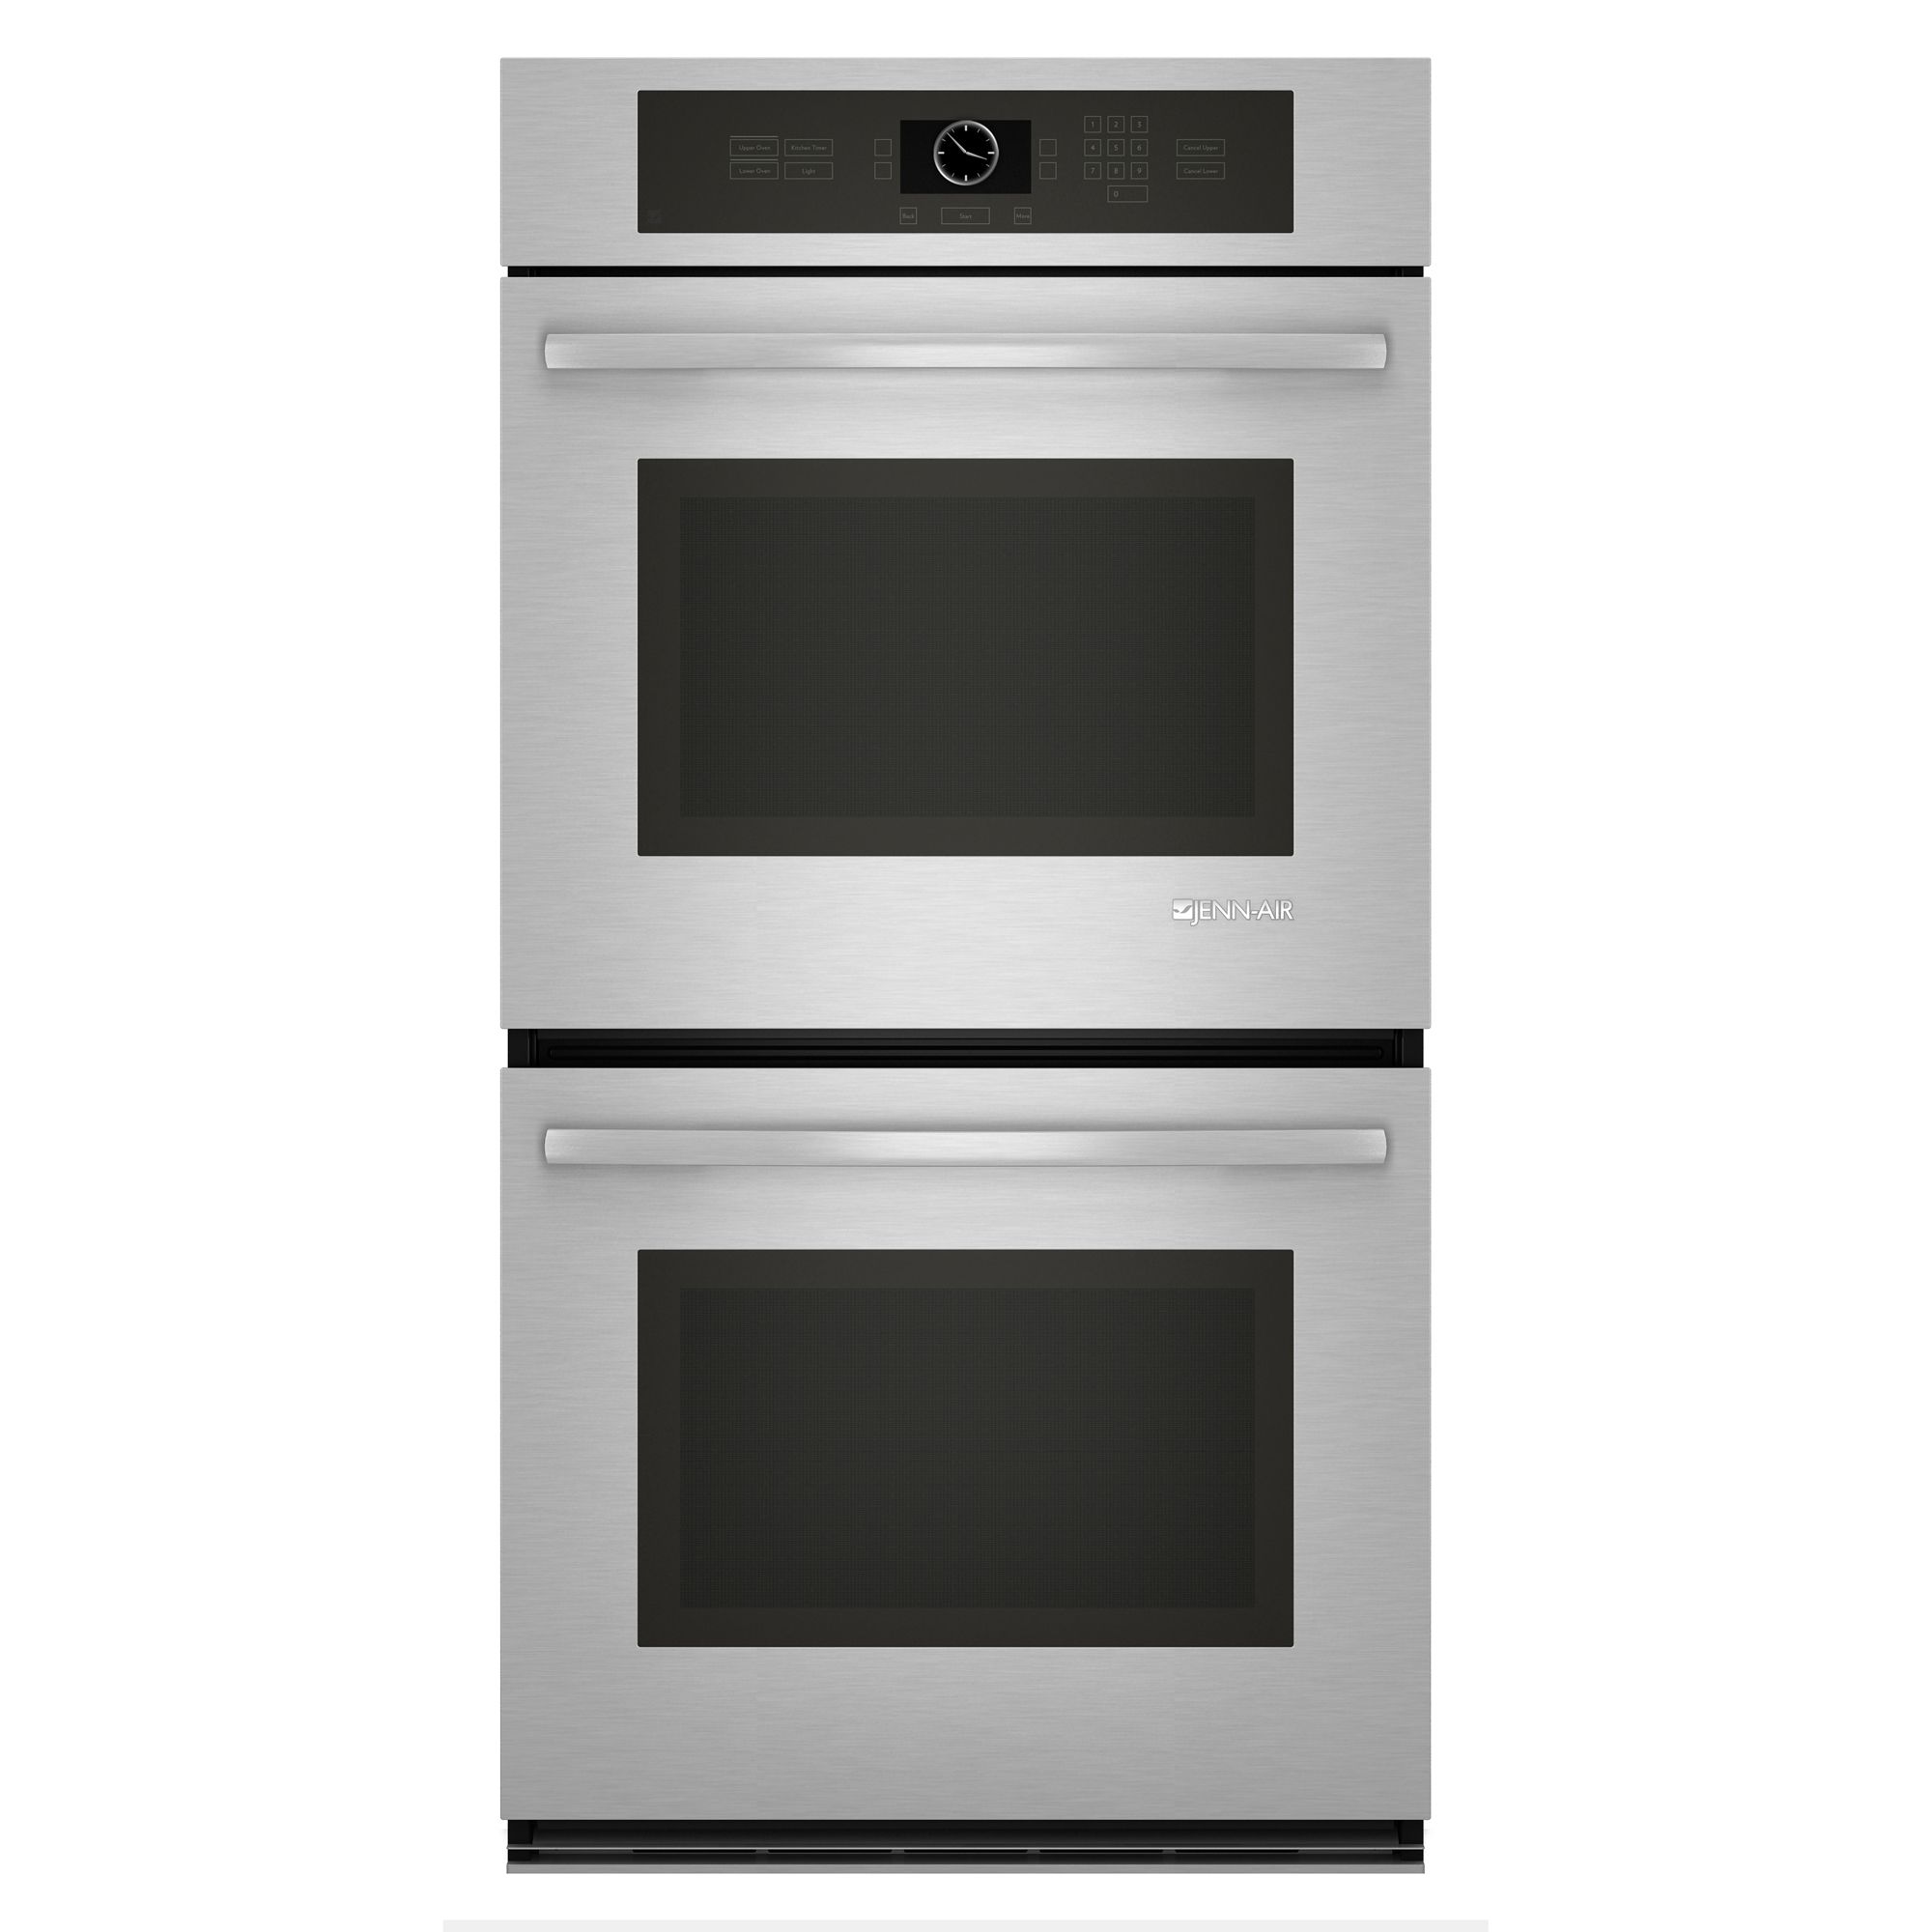 27" Electric Double Wall Oven logo